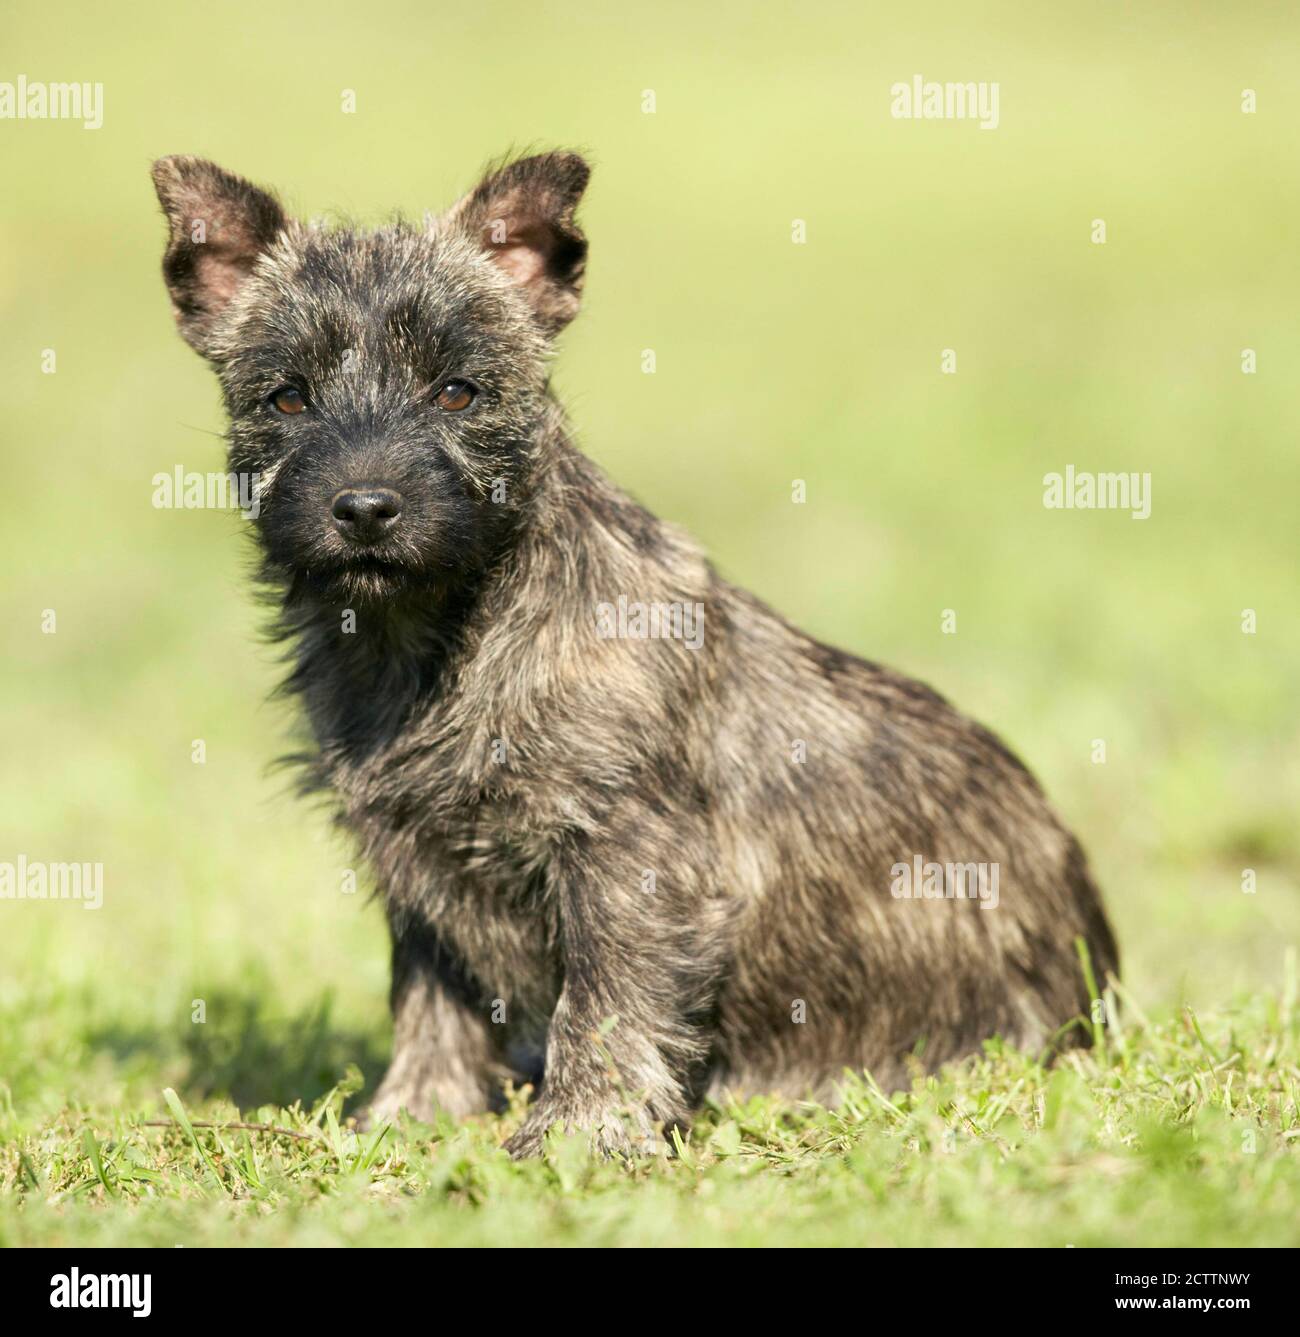 Cairn Terrier. Puppy sitting on grass. Stock Photo